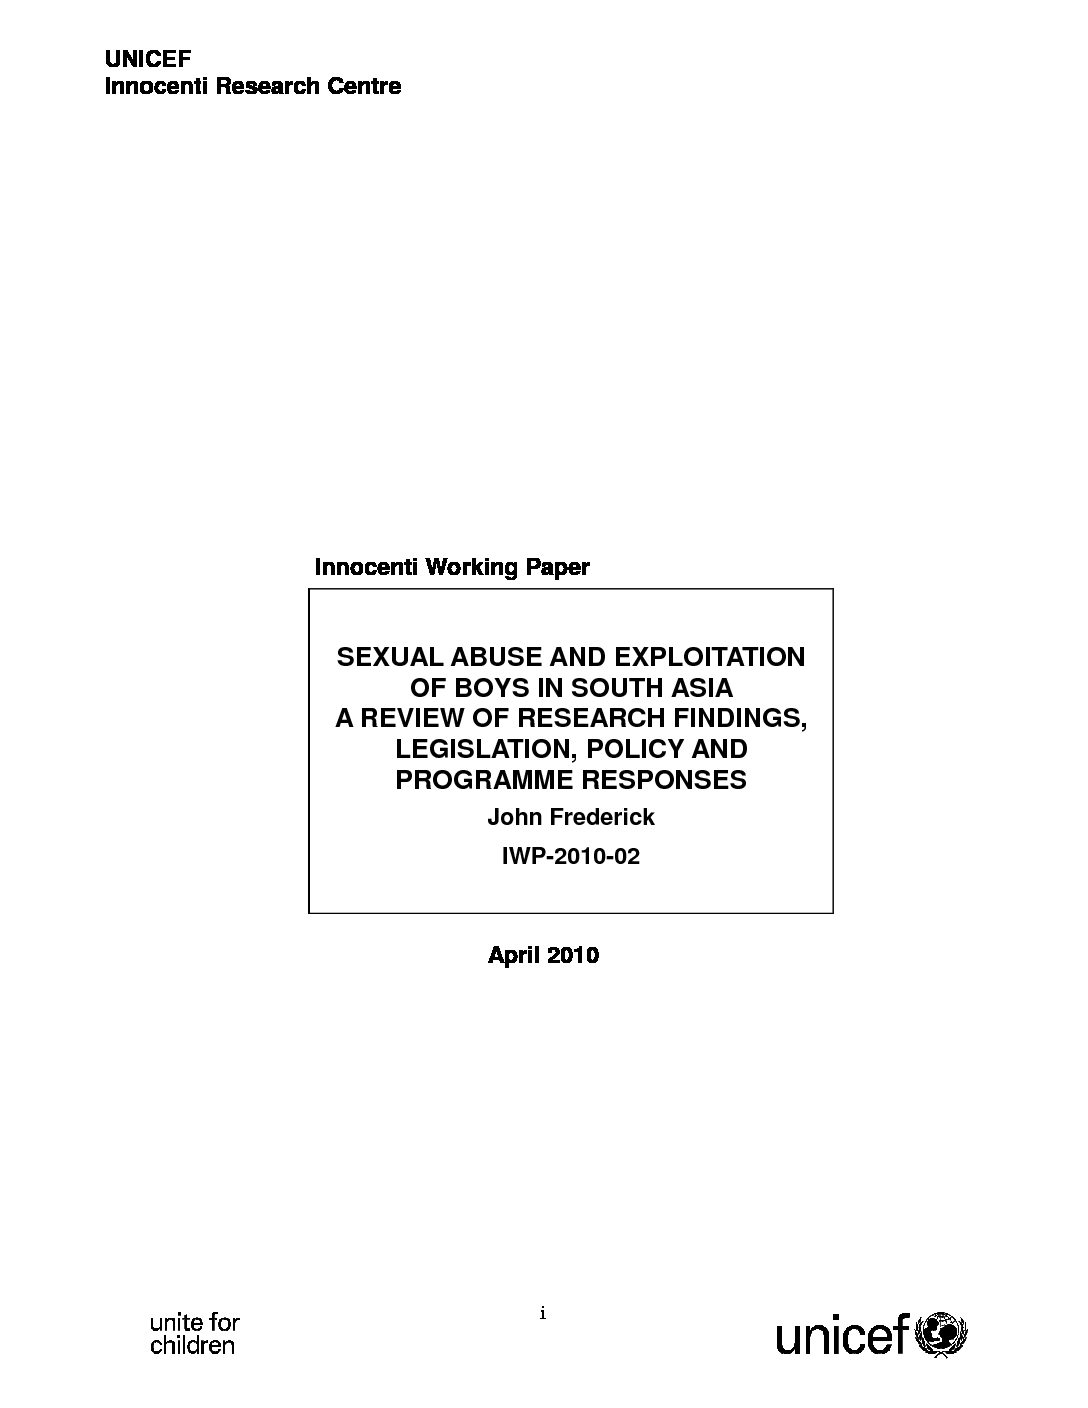 Sexual Abuse and Exploitation of Boys in South Asia-A Review of Research Findings, Legislation, Policy, and Program Responses